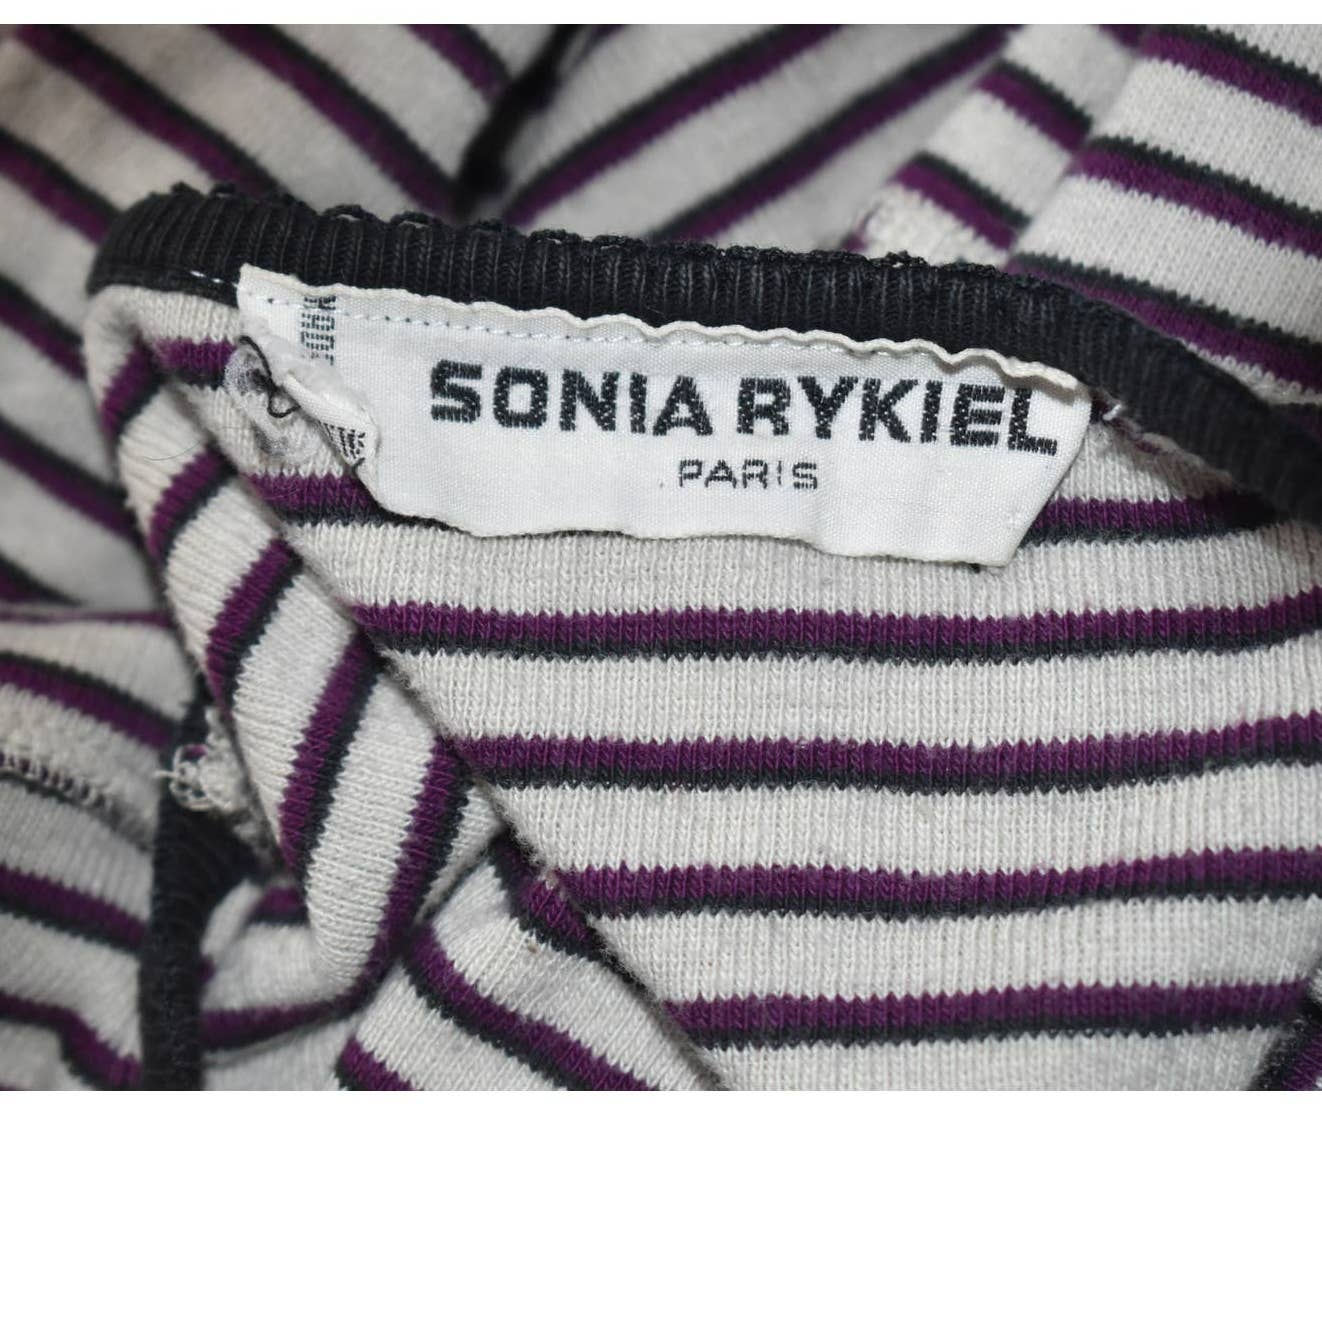 VIntage Sonia Rykiel Black White and Red Striped Long Sleeve Top - M